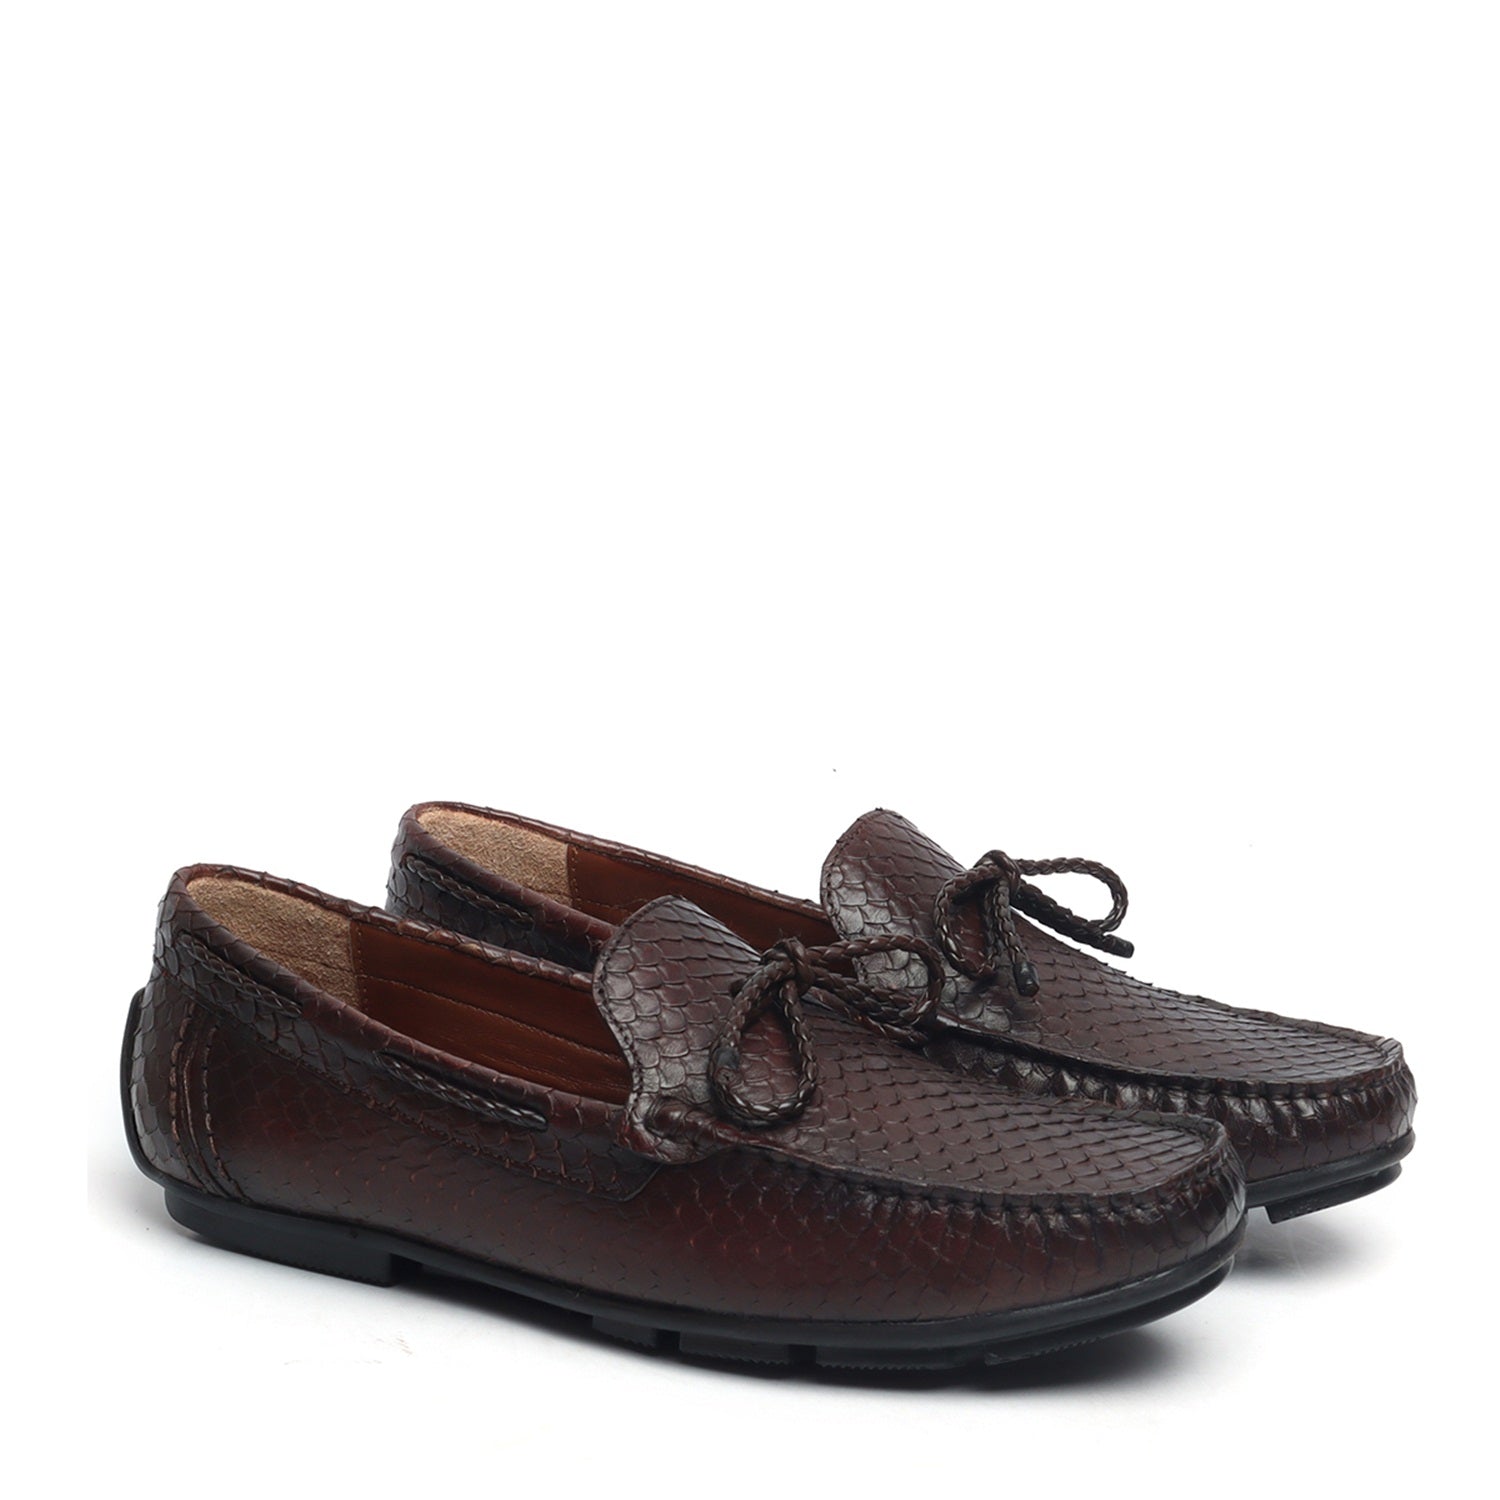 Weaved Tassel Bow Loafers in Dark Brown Snake Scales Textured Leather